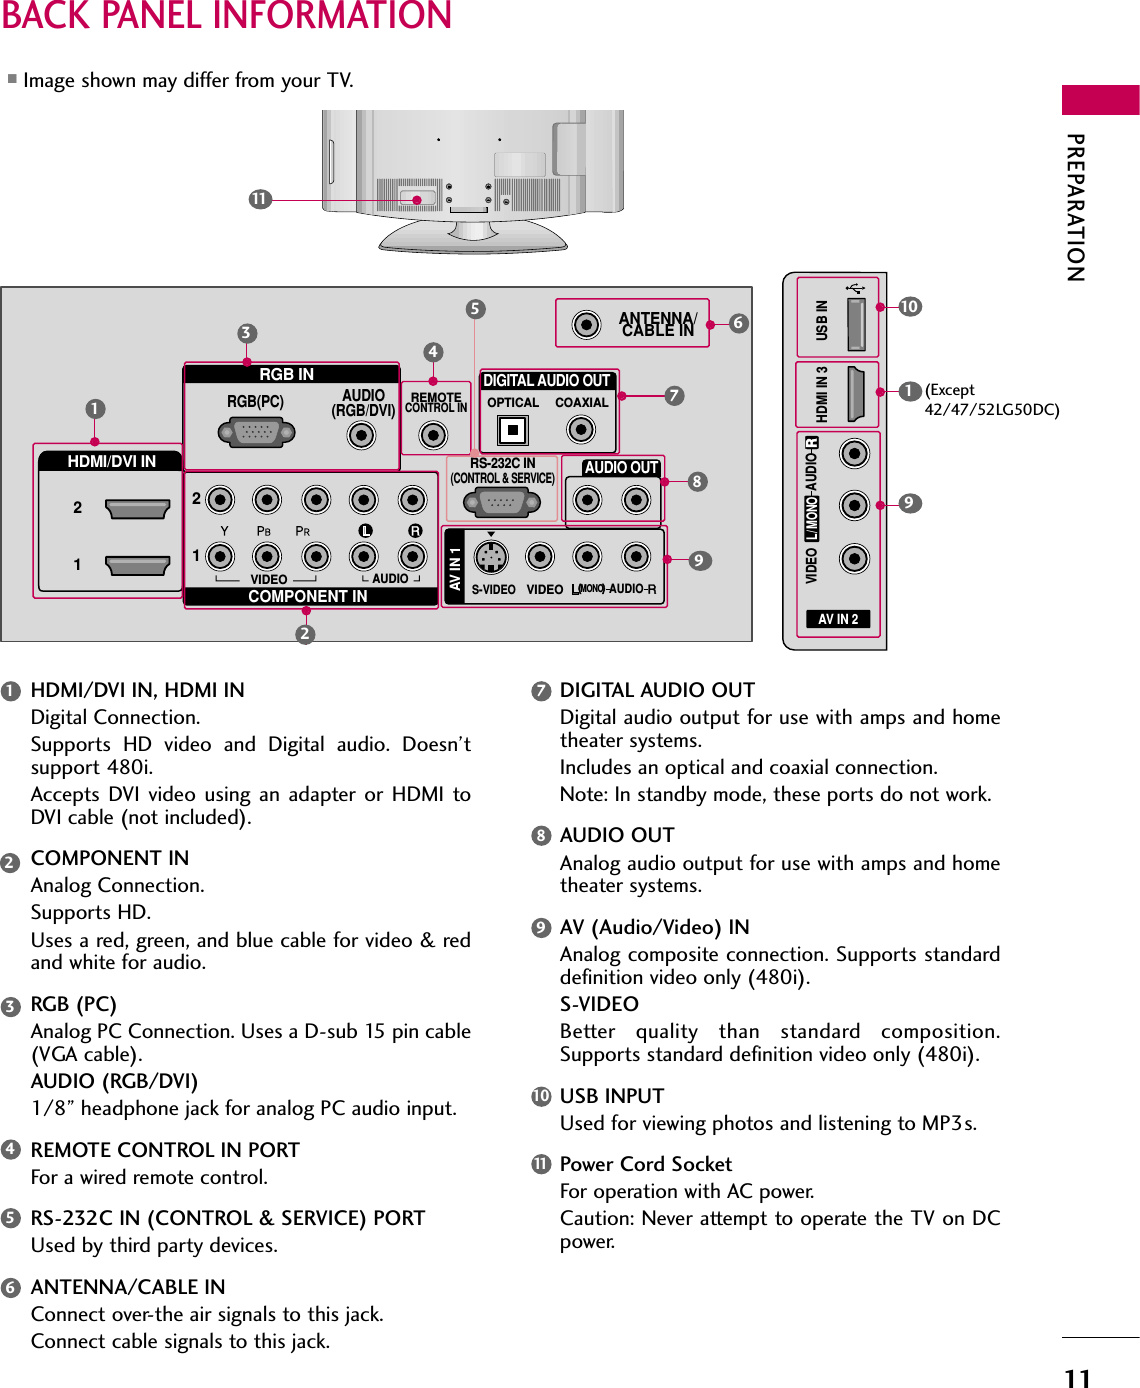 PREPARATION11BACK PANEL INFORMATION■Image shown may differ from your TV.AV IN 2L/MONORAUDIOVIDEOHDMI IN 3 USB IN(            )RGB INCOMPONENT INAUDIO(RGB/DVI)RGB(PC)REMOTECONTROL INANTENNA/CABLE IN12RS-232C IN(CONTROL &amp; SERVICE)VIDEOAUDIOOPTICAL COAXIALDIGITAL AUDIO OUTAUDIO OUTAV IN 1RHDMI/DVI IN 21VIDEOMONO(            )AUDIOS-VIDEO1346782951R(            )11HDMI/DVI IN, HDMI INDigital Connection. Supports  HD  video  and  Digital  audio.  Doesn’tsupport 480i. Accepts  DVI video  using an  adapter or HDMI  toDVI cable (not included).COMPONENT INAnalog Connection. Supports HD. Uses a red, green, and blue cable for video &amp; redand white for audio.RGB (PC)Analog PC Connection. Uses a D-sub 15 pin cable(VGA cable).AUDIO (RGB/DVI)1/8” headphone jack for analog PC audio input.REMOTE CONTROL IN PORTFor a wired remote control.RS-232C IN (CONTROL &amp; SERVICE) PORTUsed by third party devices.ANTENNA/CABLE INConnect over-the air signals to this jack.Connect cable signals to this jack.DIGITAL AUDIO OUTDigital audio output for use with amps and hometheater systems. Includes an optical and coaxial connection.Note: In standby mode, these ports do not work.AUDIO OUTAnalog audio output for use with amps and hometheater systems.AV (Audio/Video) INAnalog composite connection. Supports standarddefinition video only (480i).S-VIDEOBetter  quality  than  standard  composition.Supports standard definition video only (480i).USB INPUTUsed for viewing photos and listening to MP3s.Power Cord SocketFor operation with AC power. Caution: Never attempt to operate the TV on DCpower.1234569101178109(Except42/47/52LG50DC)